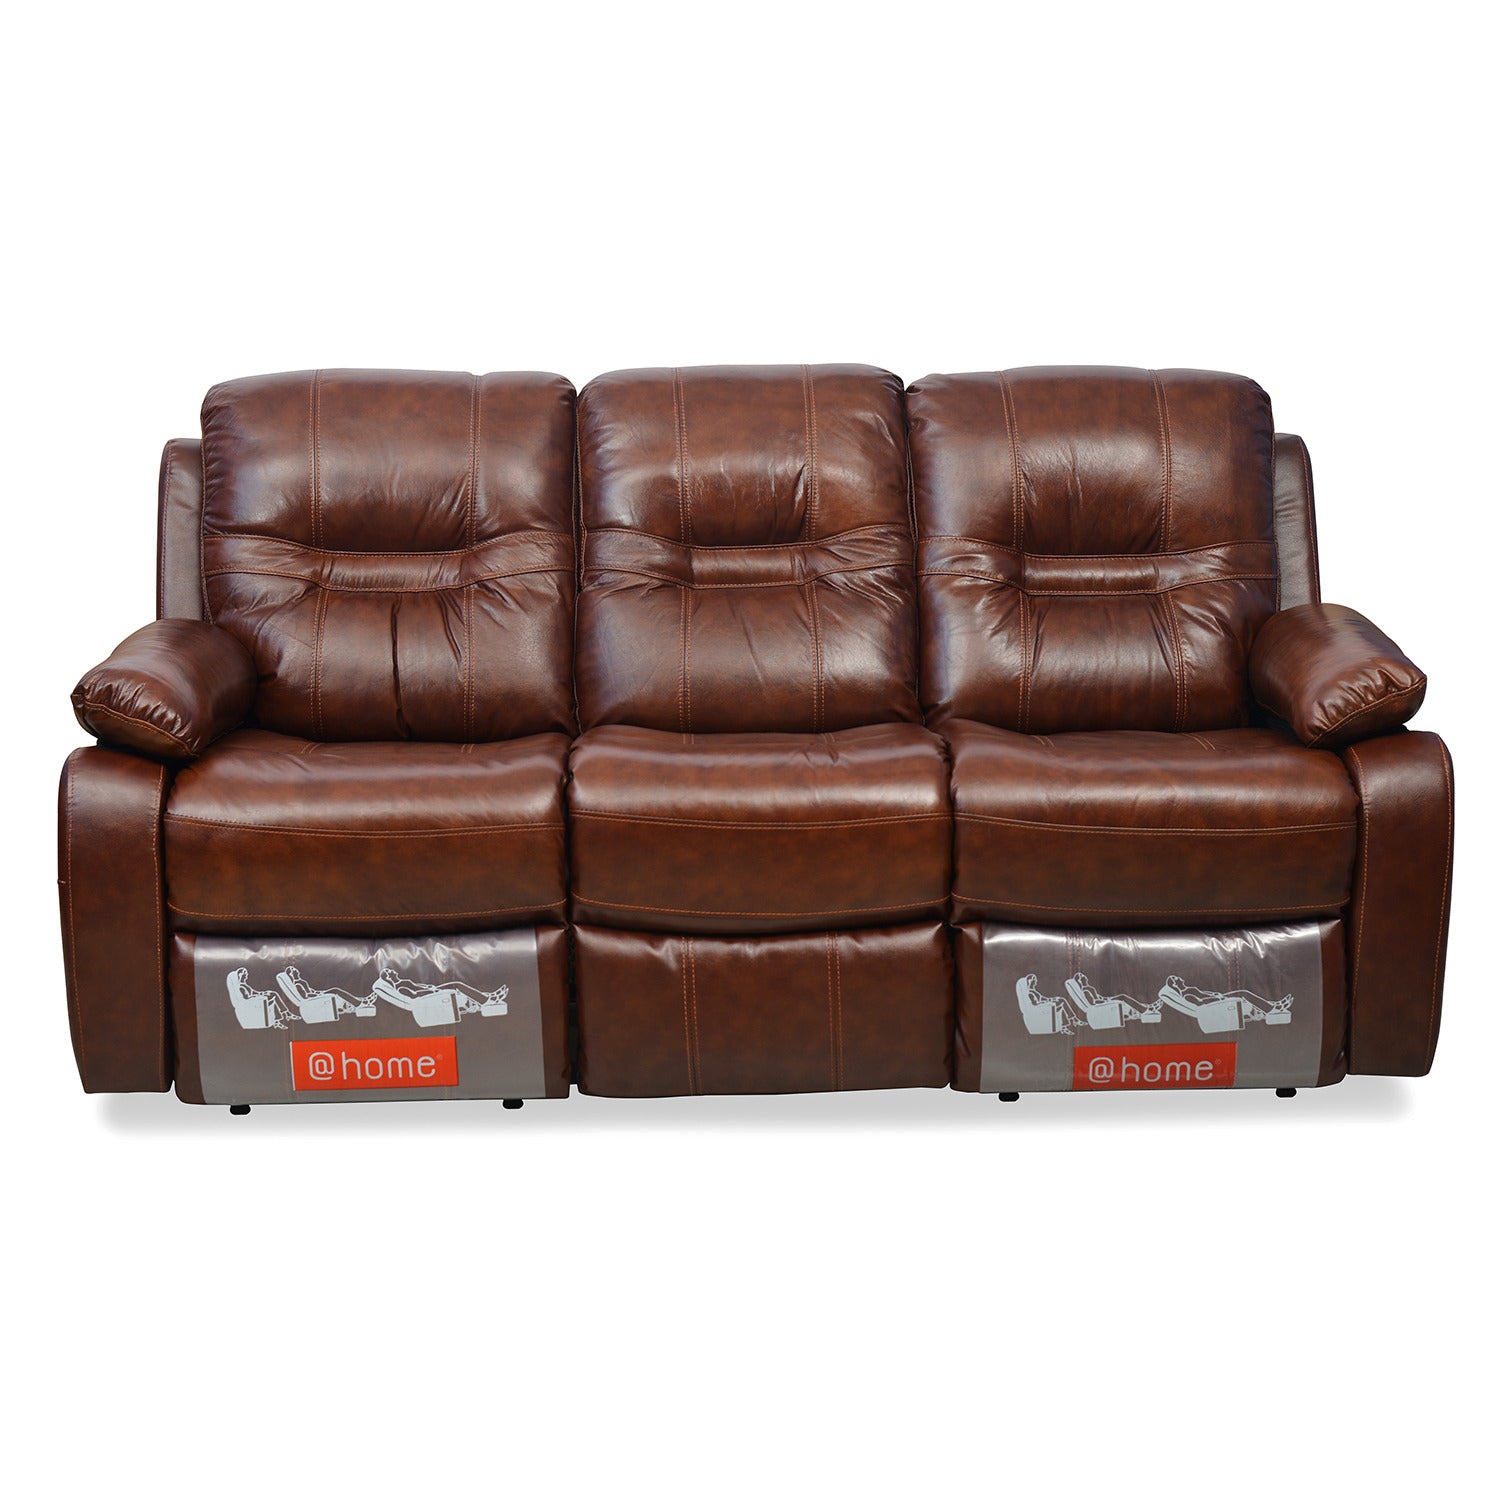 Wilson 3 Seater Sofa with 2 Manual Recliners (Caramel)